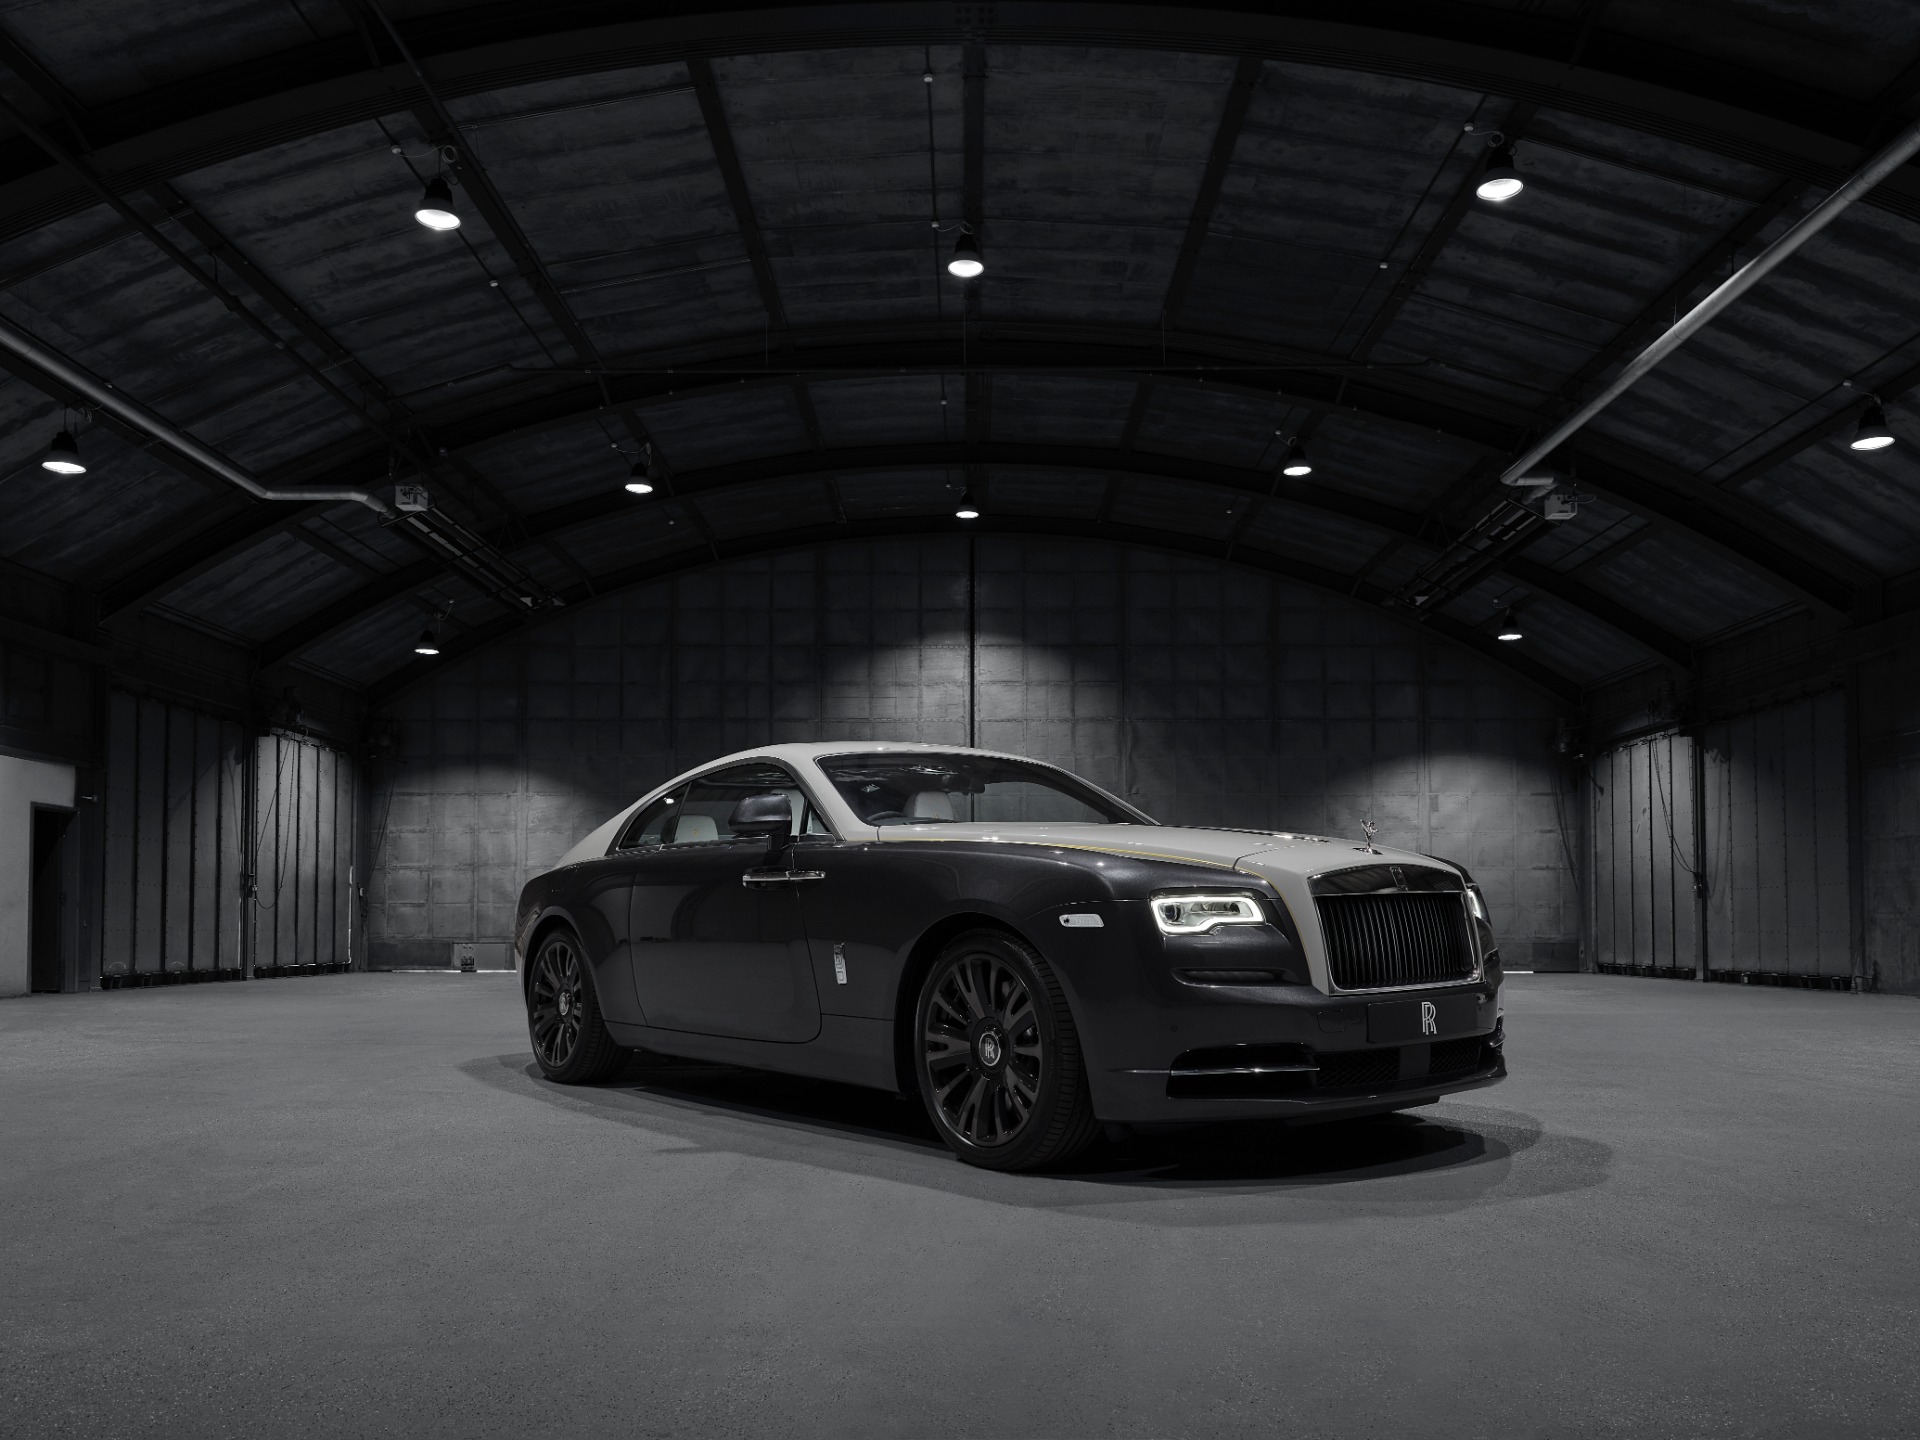 New 2020 Rolls-Royce Wraith Eagle for sale Sold at Alfa Romeo of Westport in Westport CT 06880 1